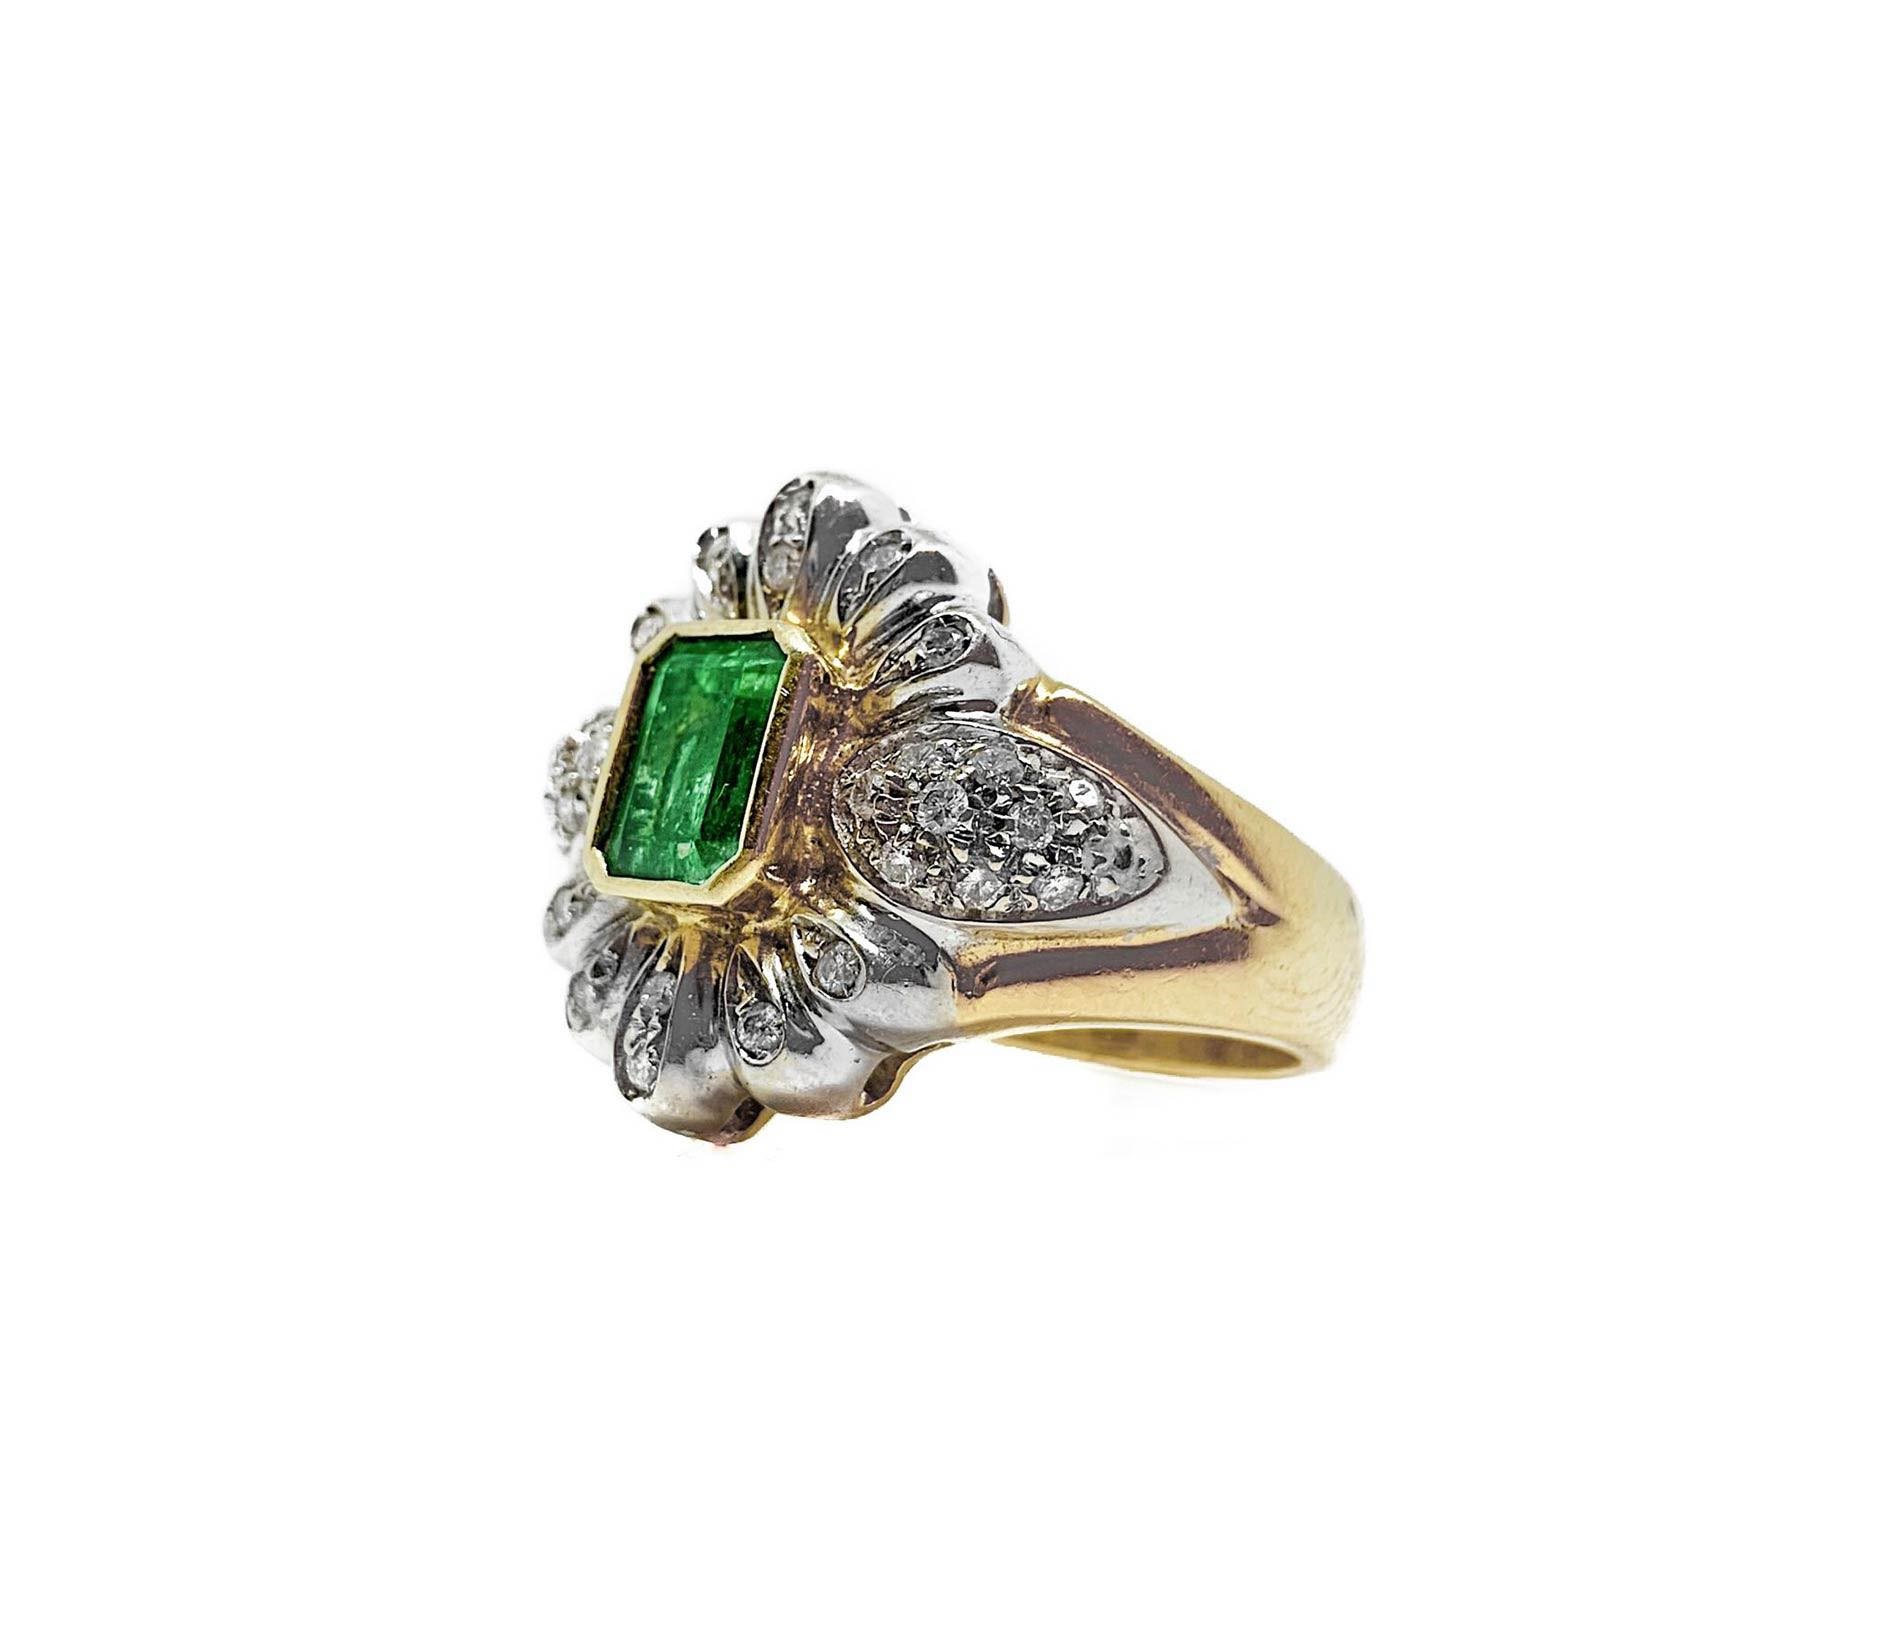 Ring in yellow gold, diamonds and emeralds - Image 3 of 6